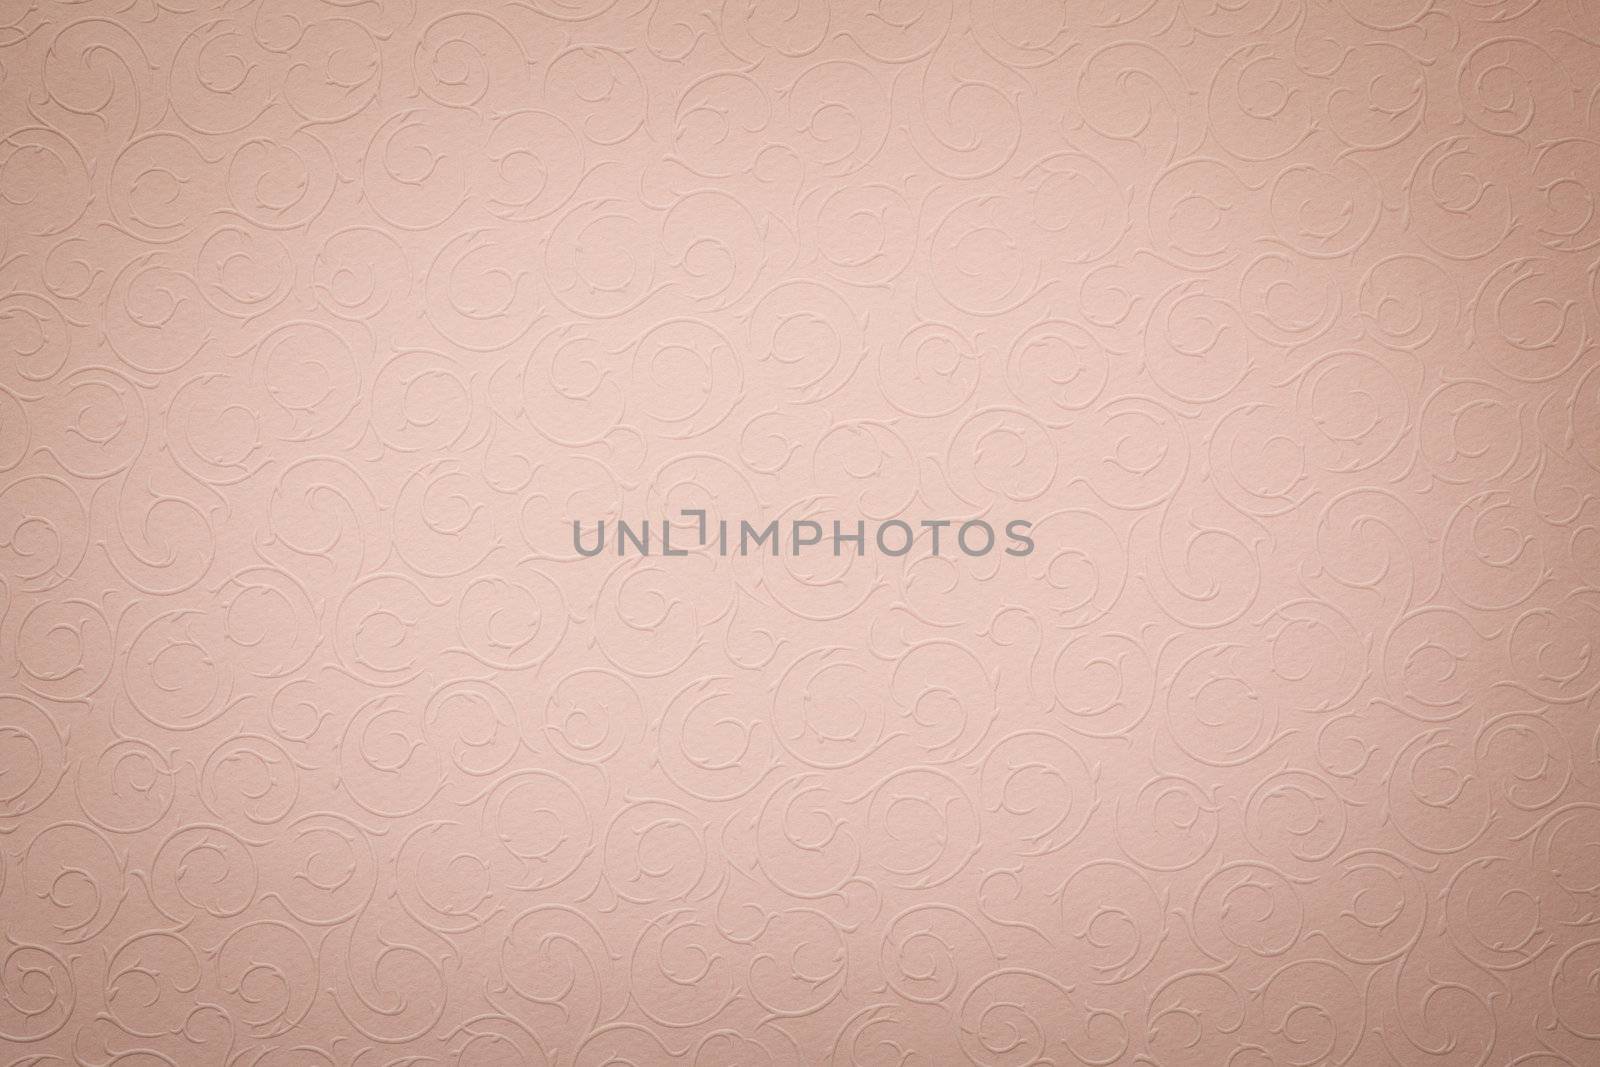 vintage faded light pink background with round organic ornaments